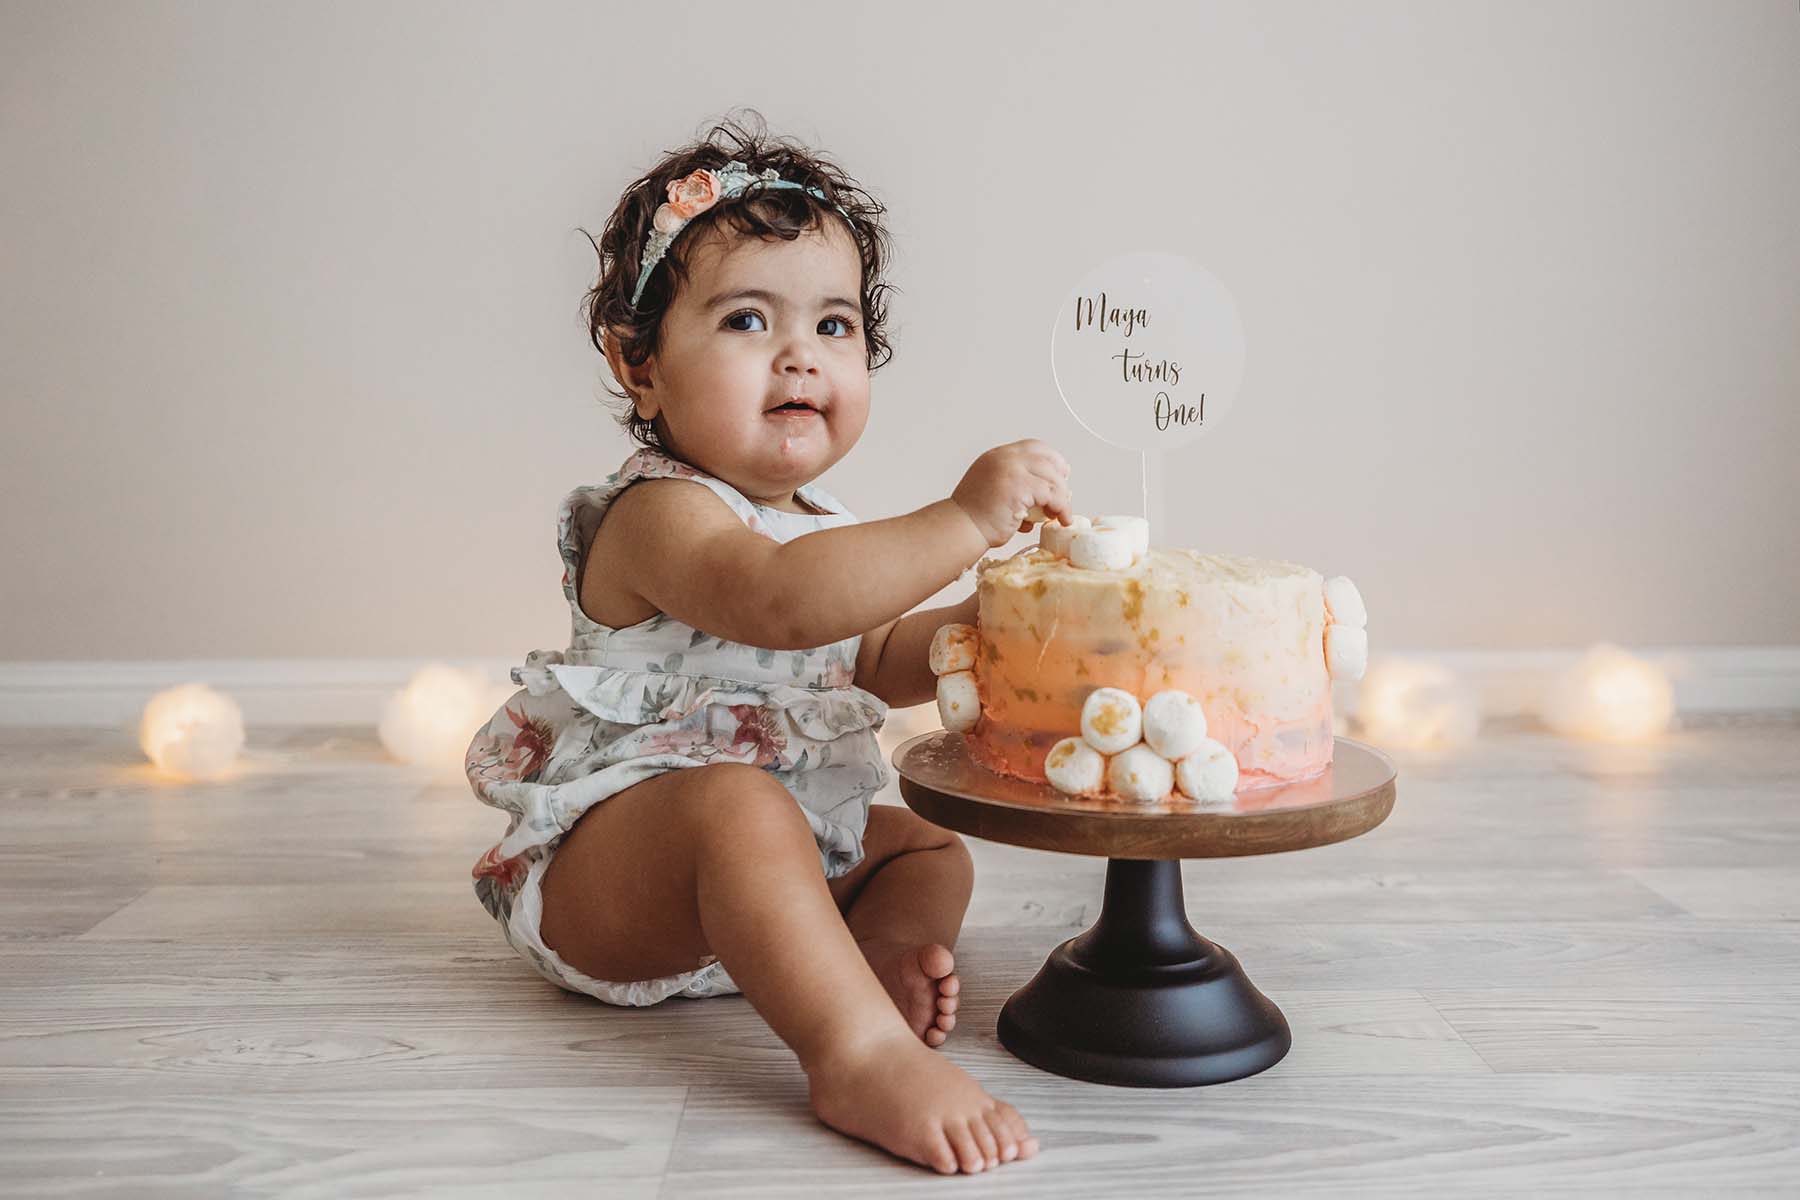 A baby girl sits with her birthday cake before smashing it wearing a floral romper